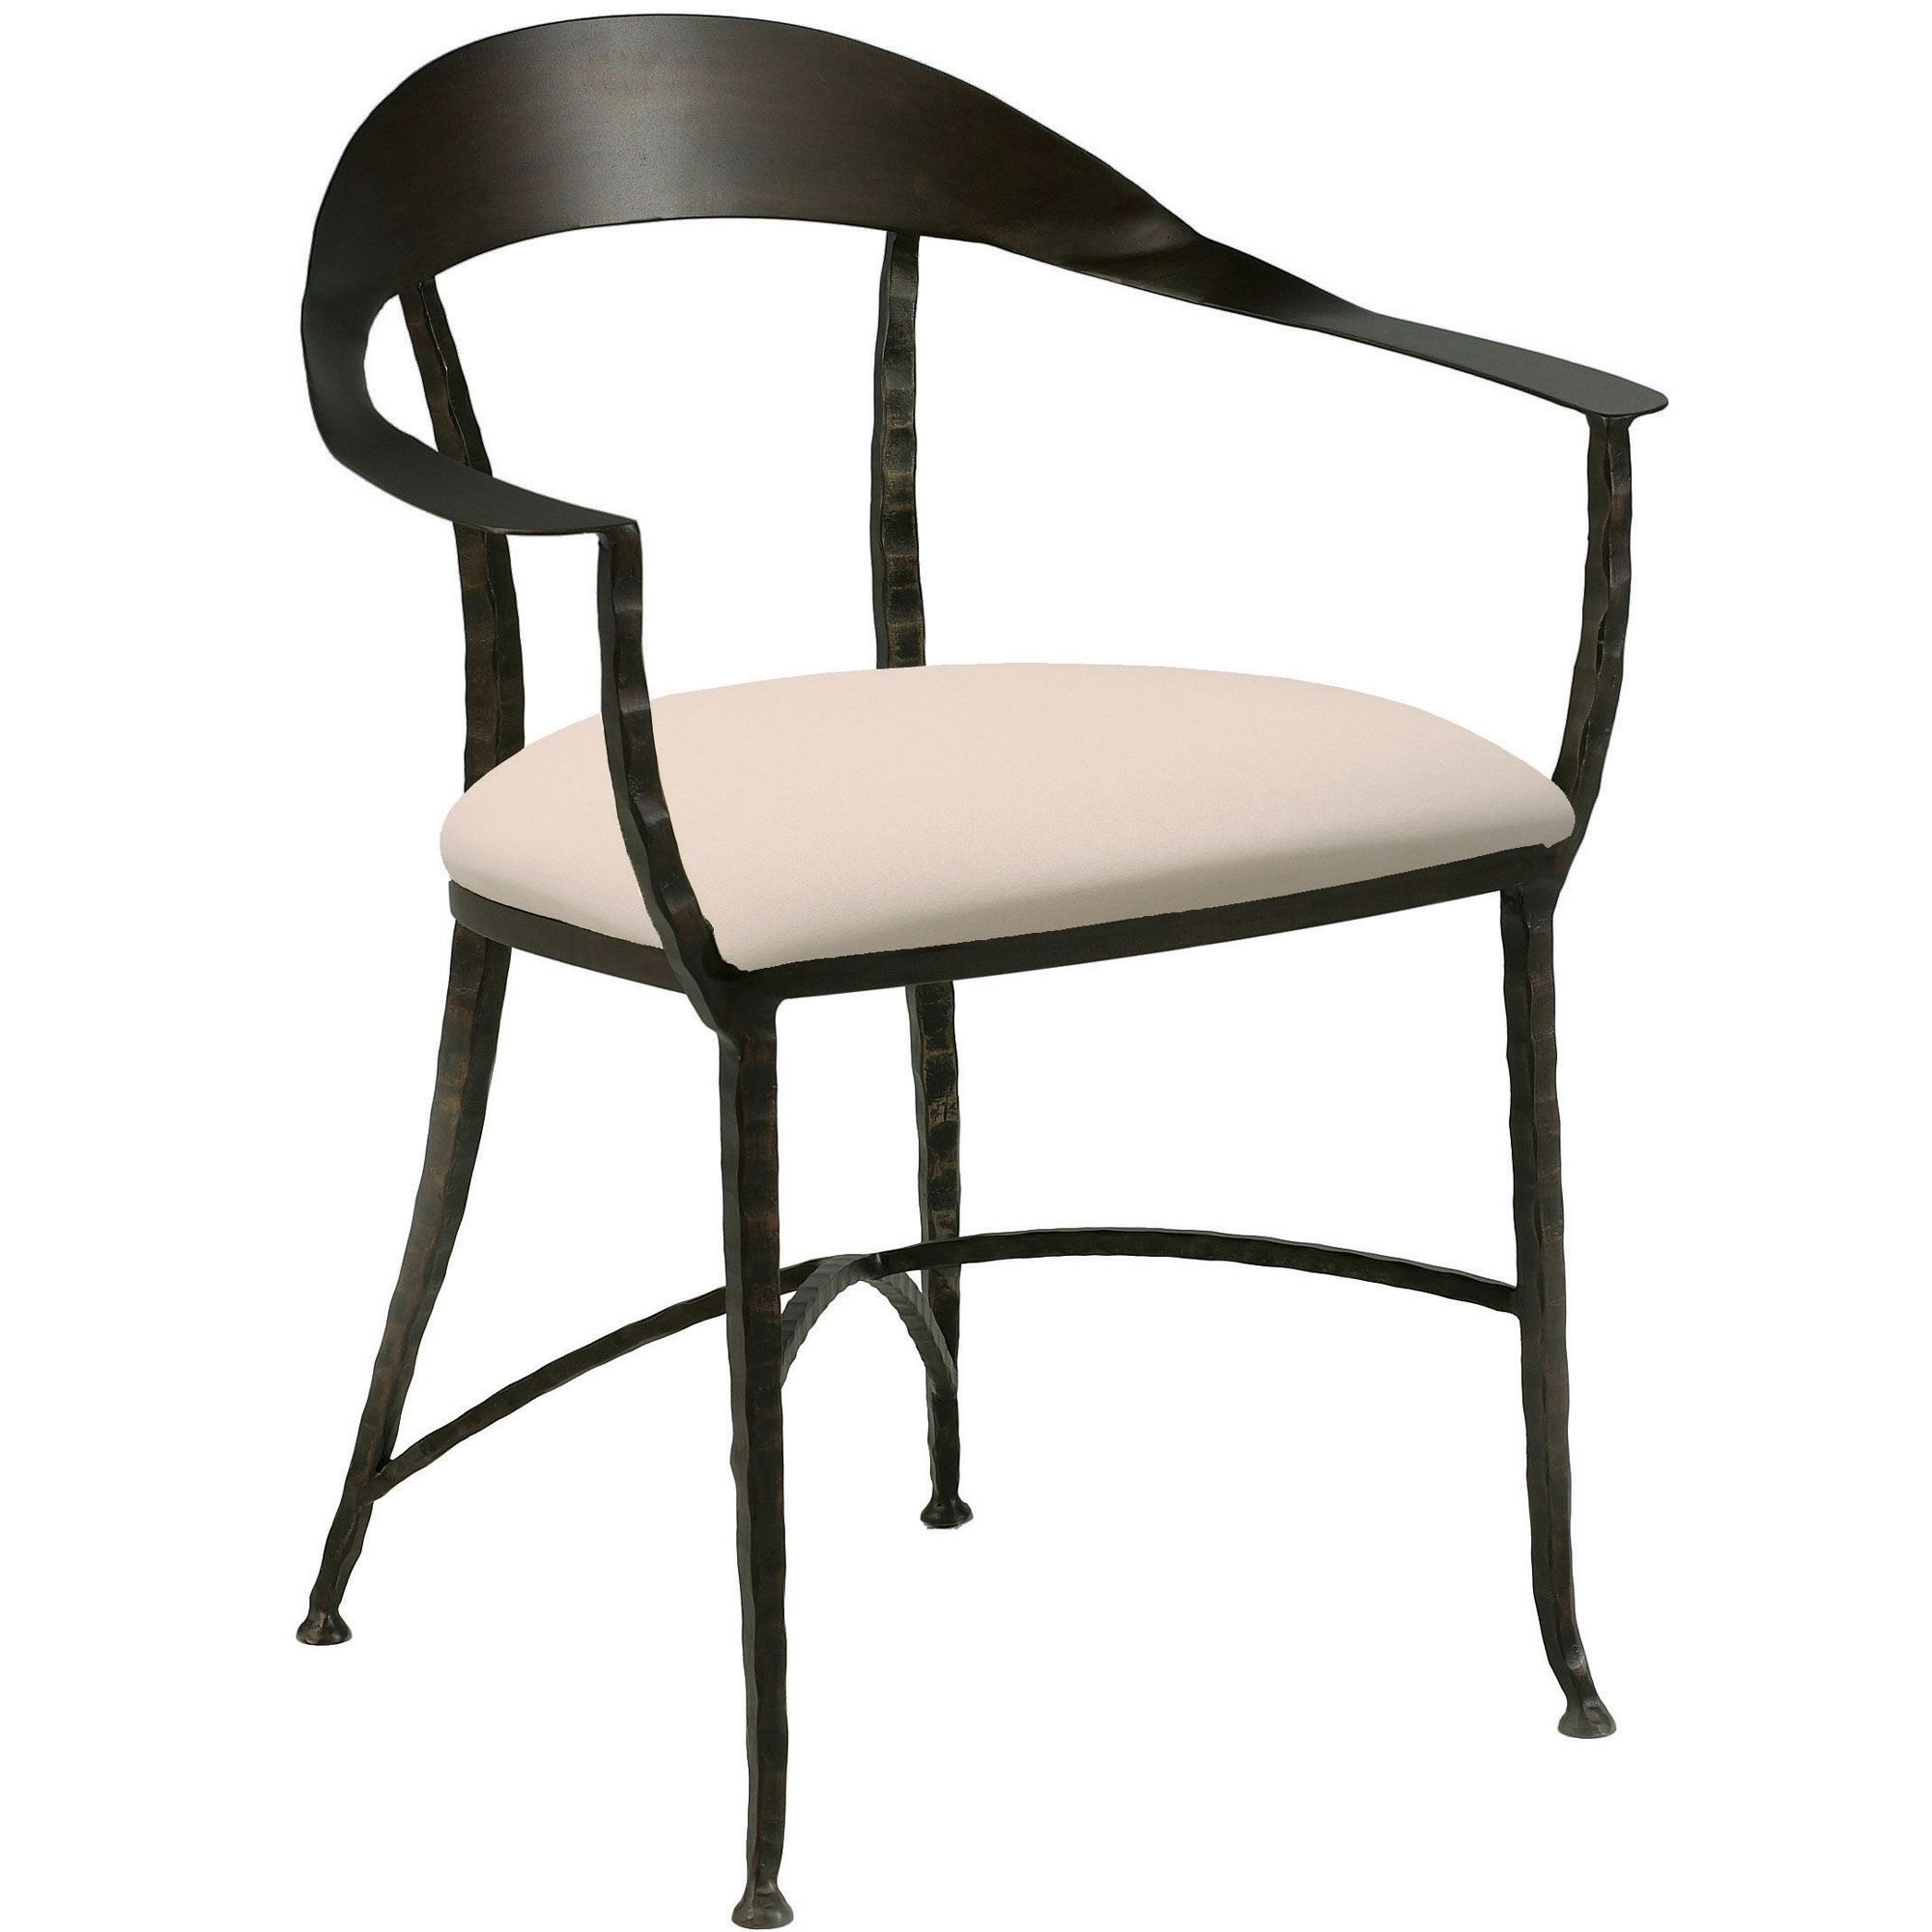 Dining room chairs made in usa 10